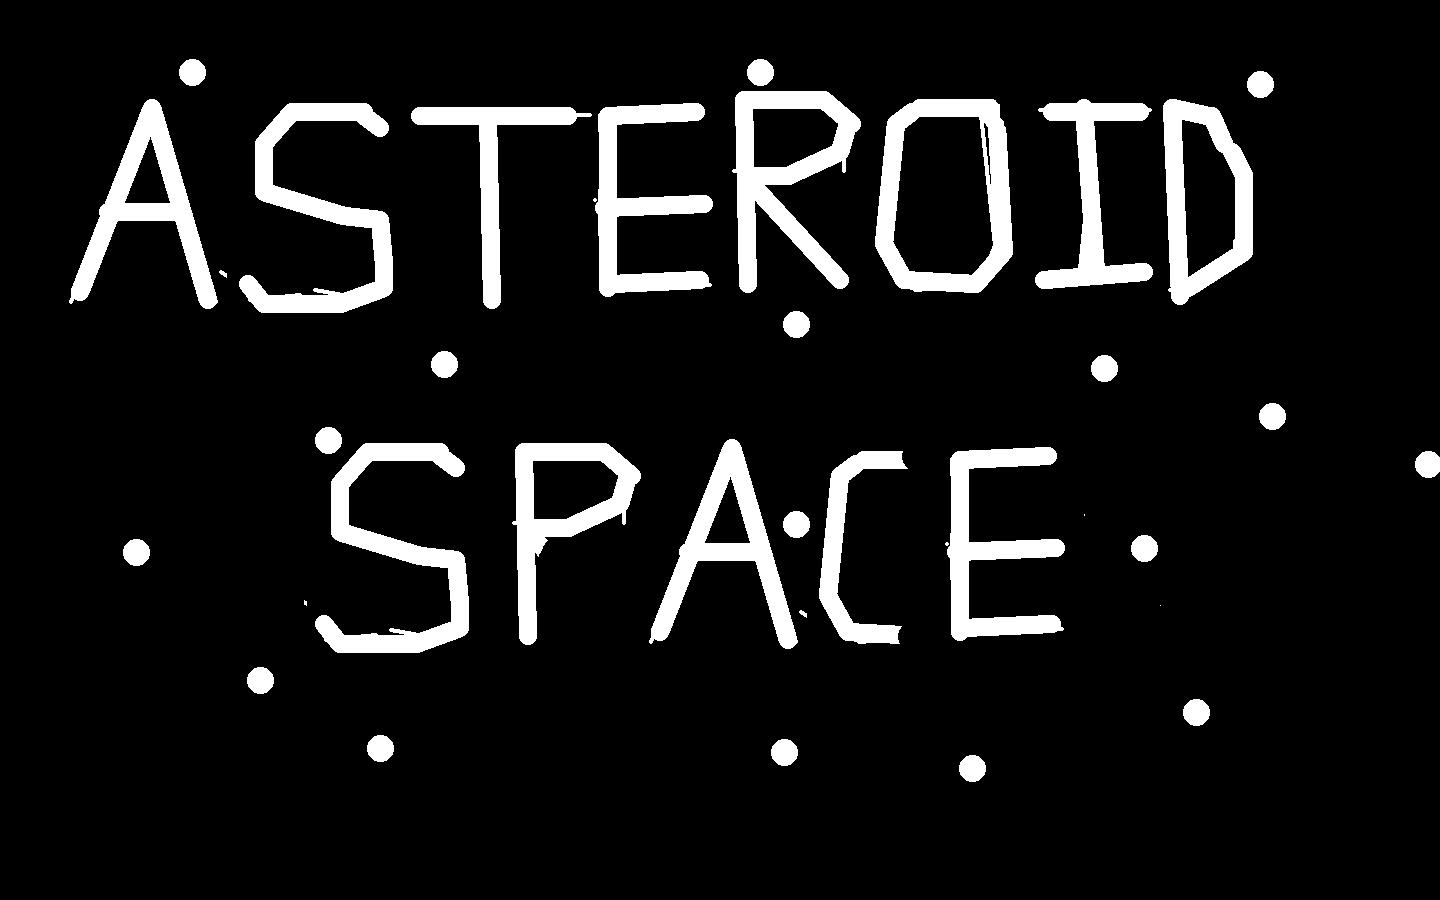 Asteroid Space